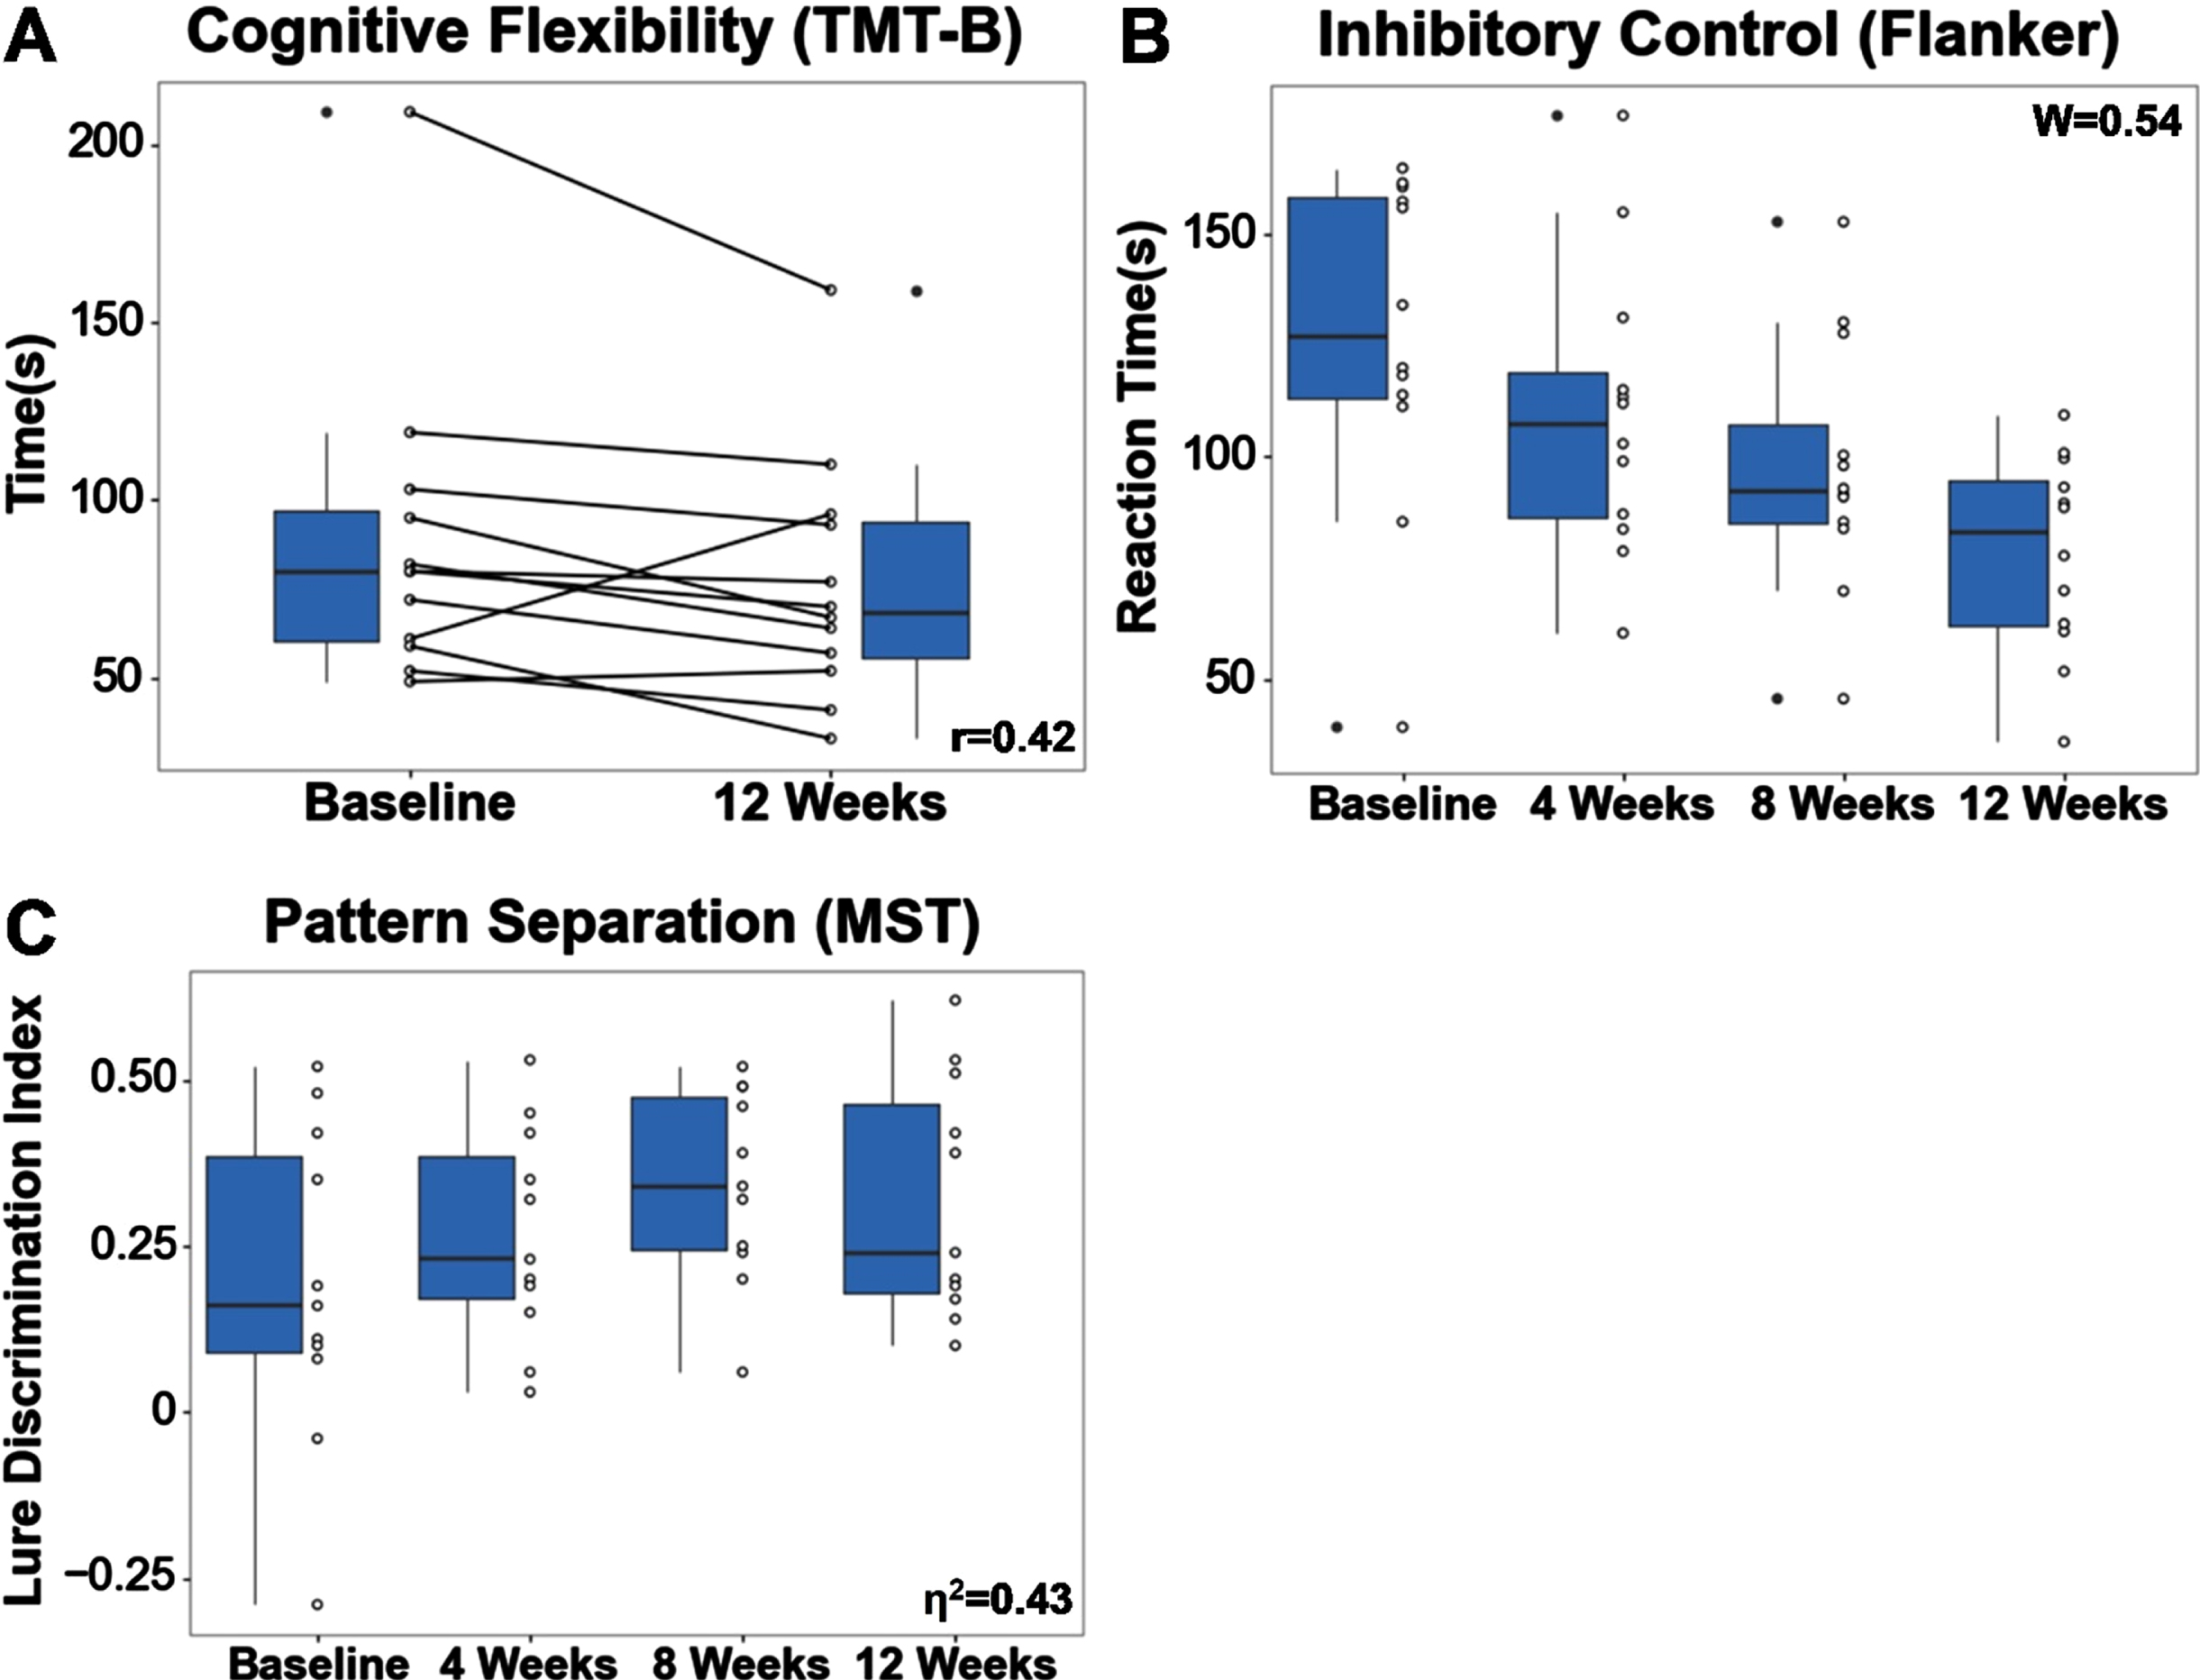 (A) Cognitive flexibility, as measured by TMT-B, improved pre- to post-intervention. (B) Inhibitory control, as measured by Flanker, improved across each of the 4 timepoints. (C) Visual discrimination related to pattern separation, as measured by MST, improved pre- to post-intervention. Effect sizes are shown in the bottom or top right corner of each boxplot.